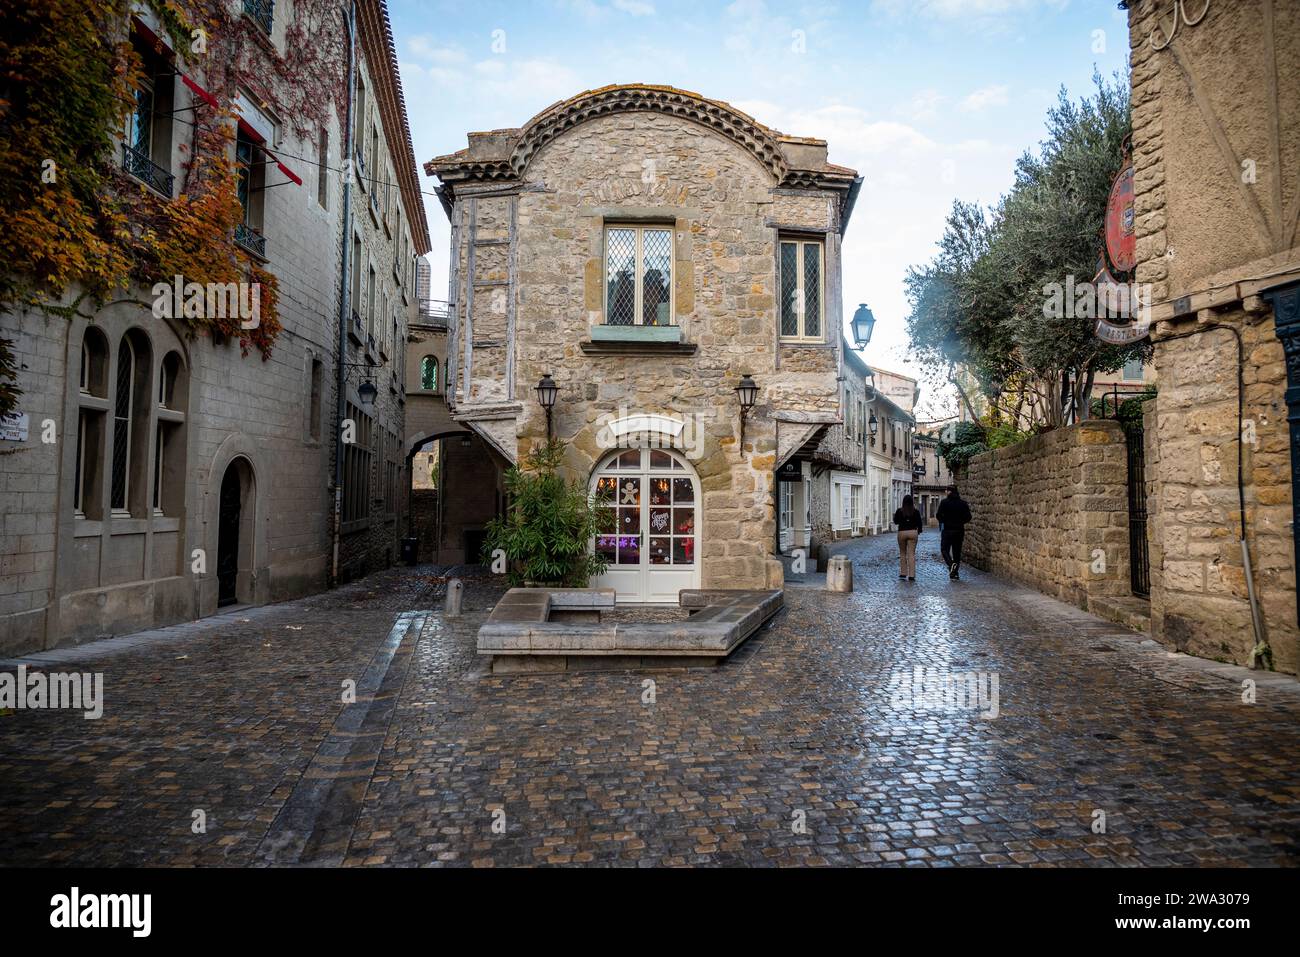 Cobblestone streets in La Cité, medieval fortified city, Carcassonne, France Stock Photo